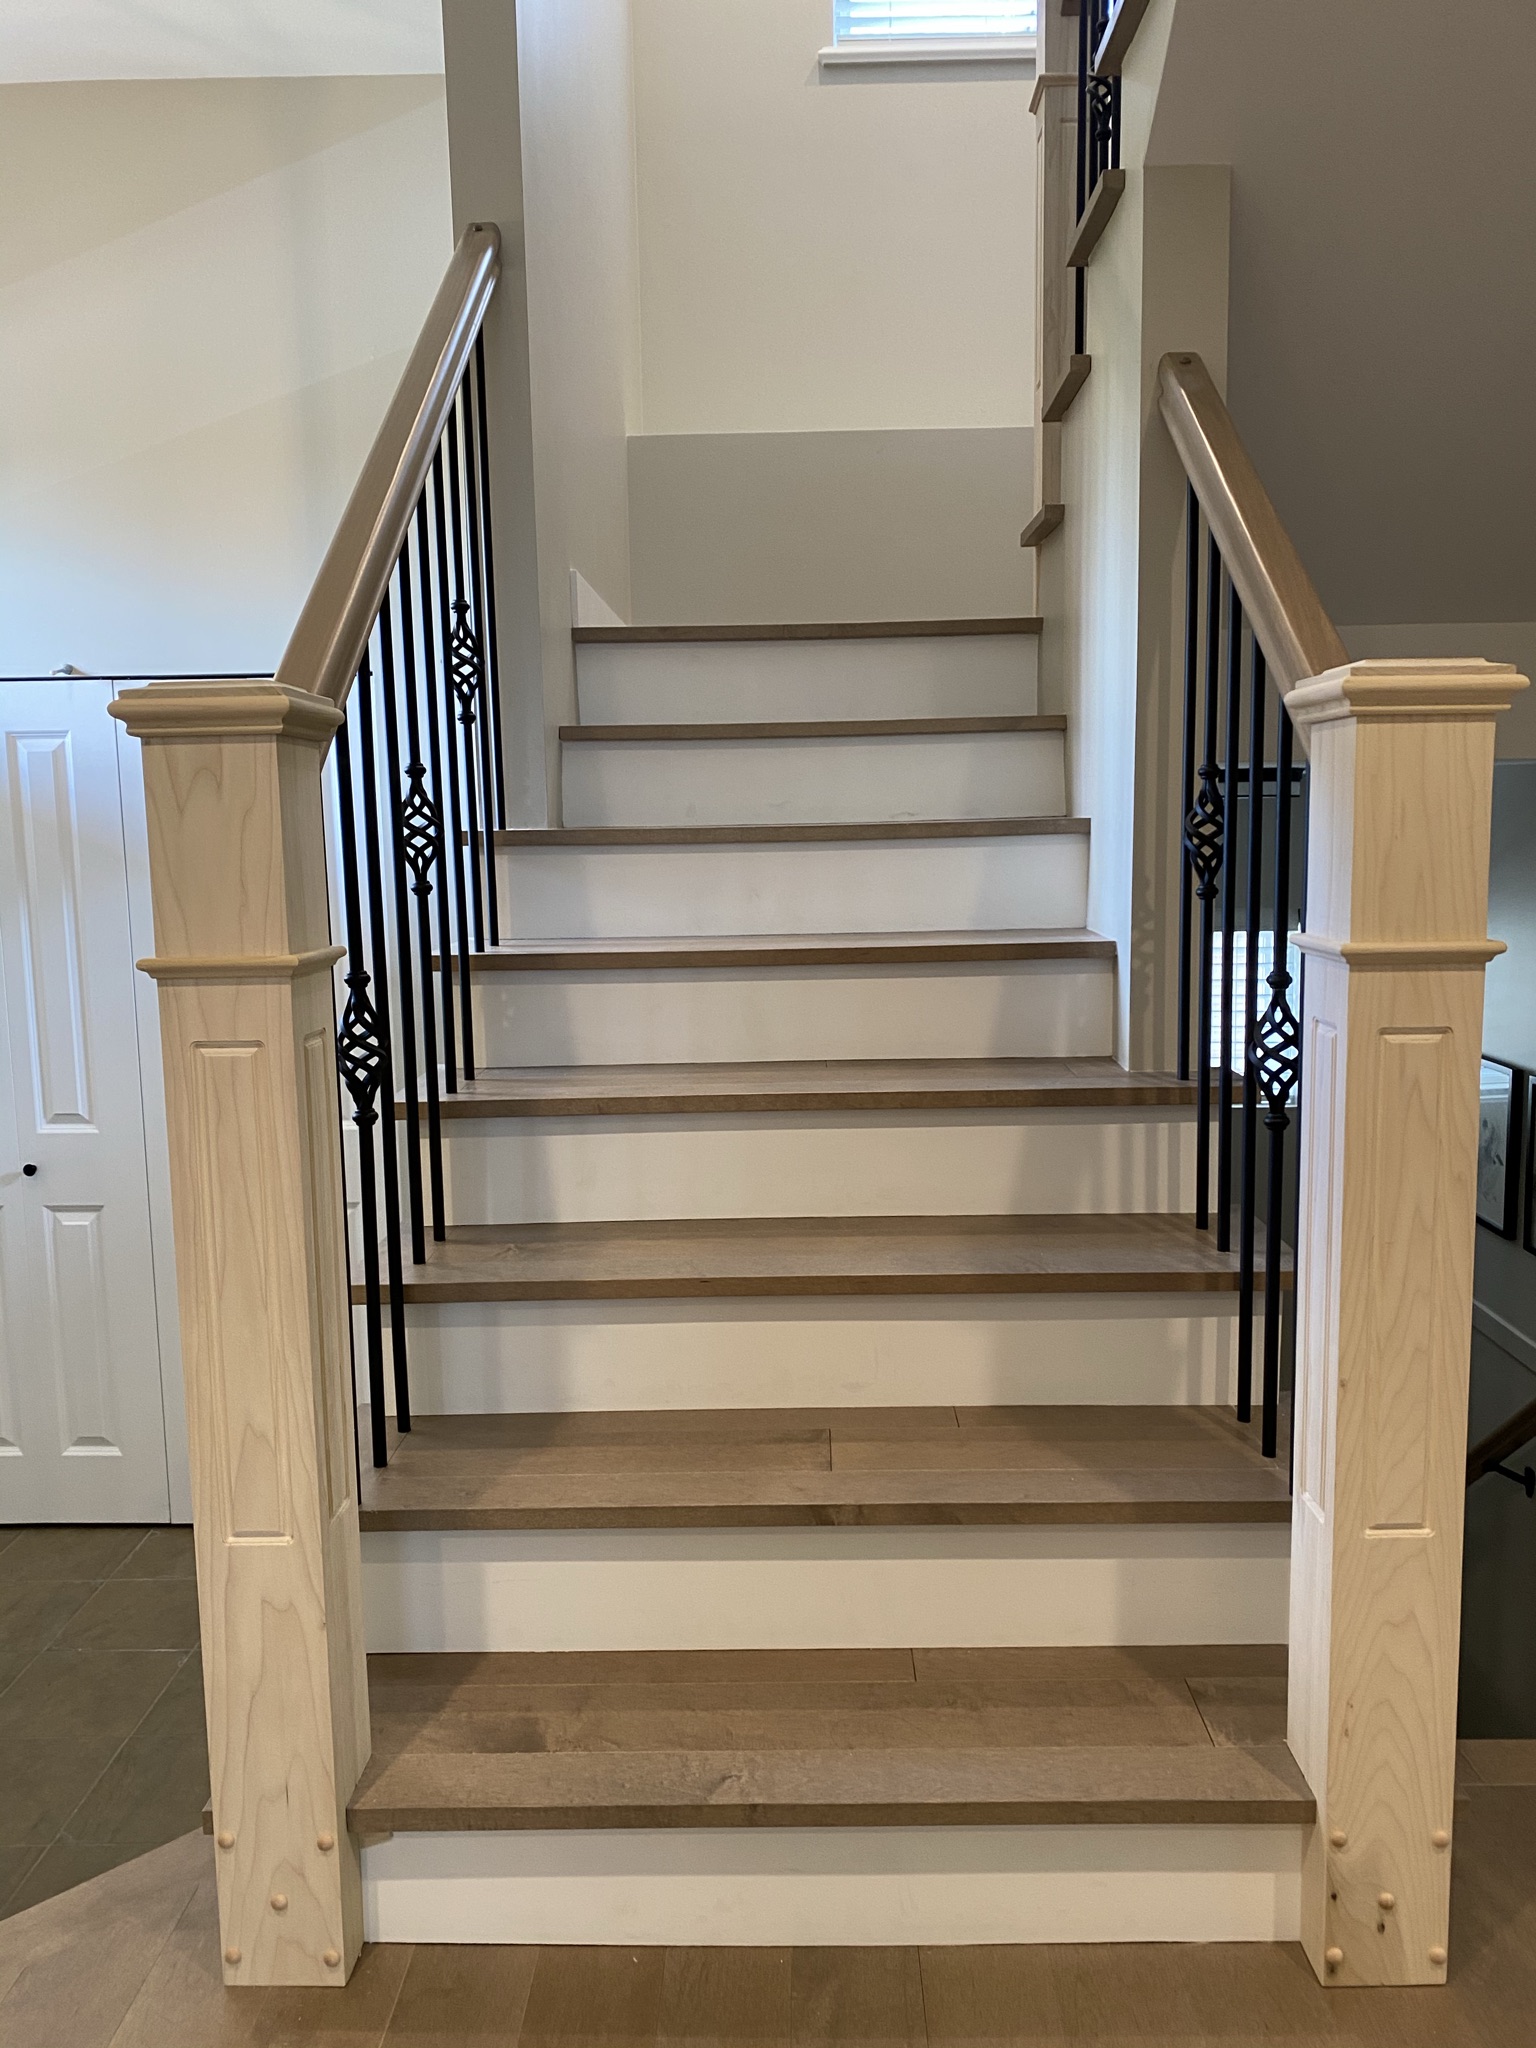 Custom Staircase Railings and Banisters